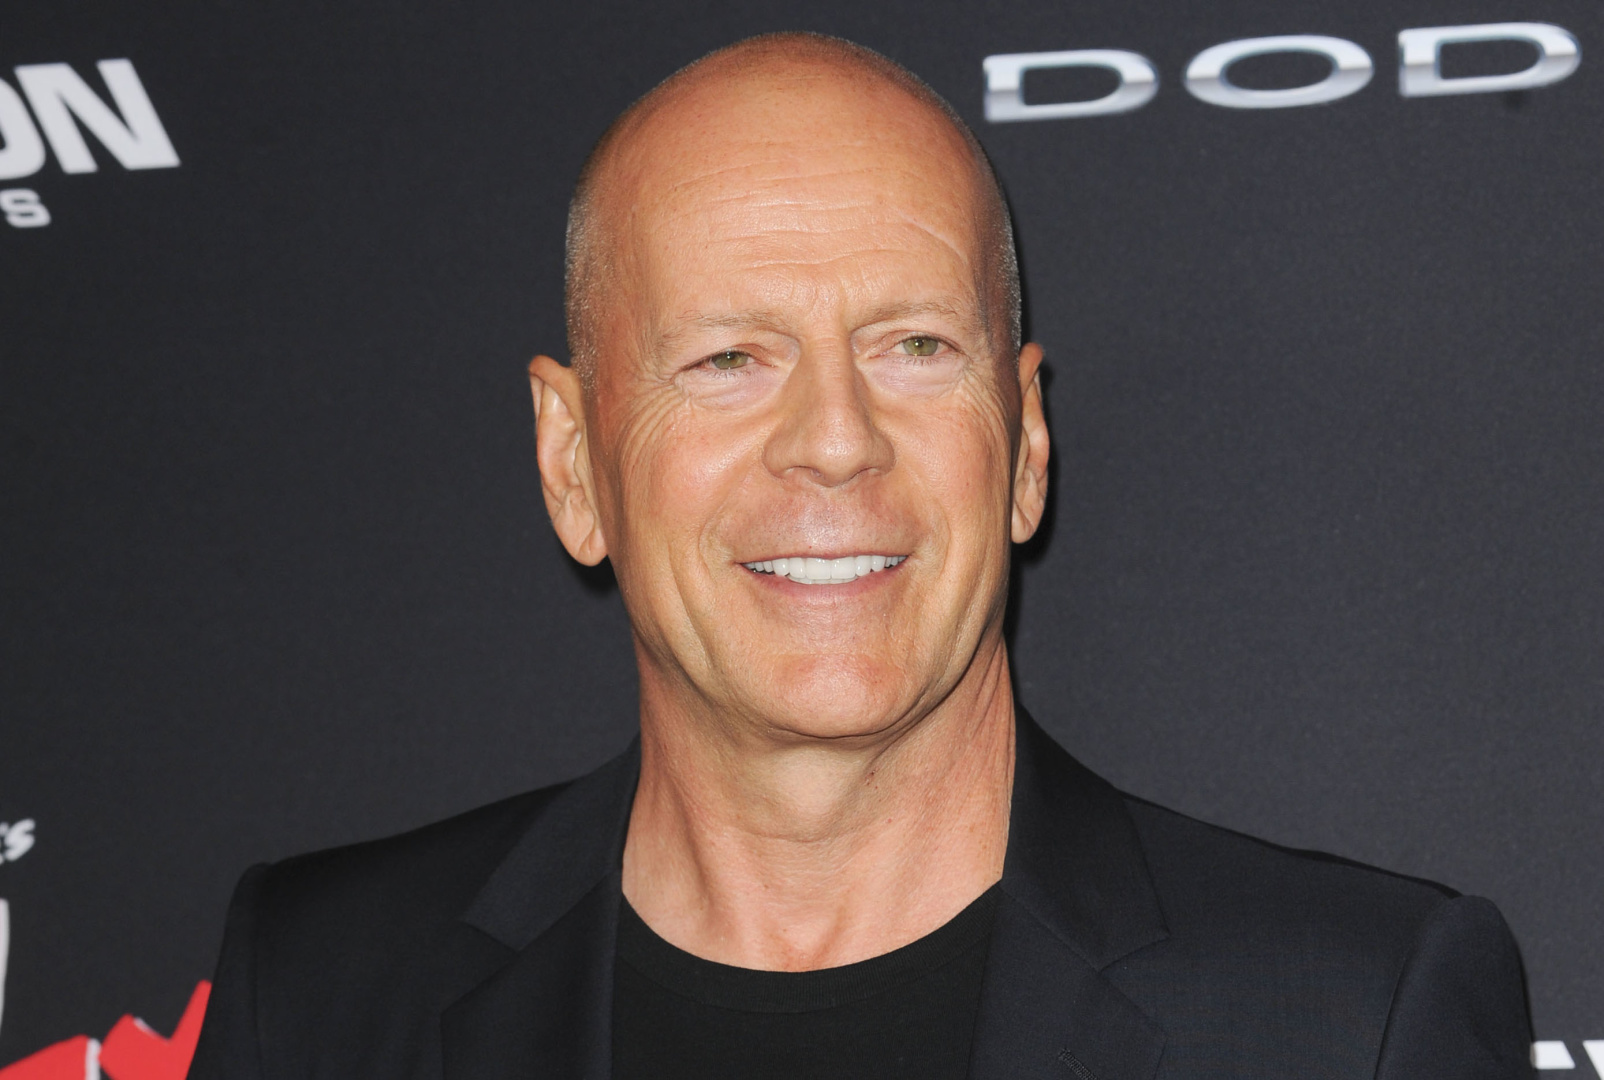 Bruce Willis Earned The Largest Acting Paycheck In Hollywood History, But It Didn't Come From An Action Blockbuster